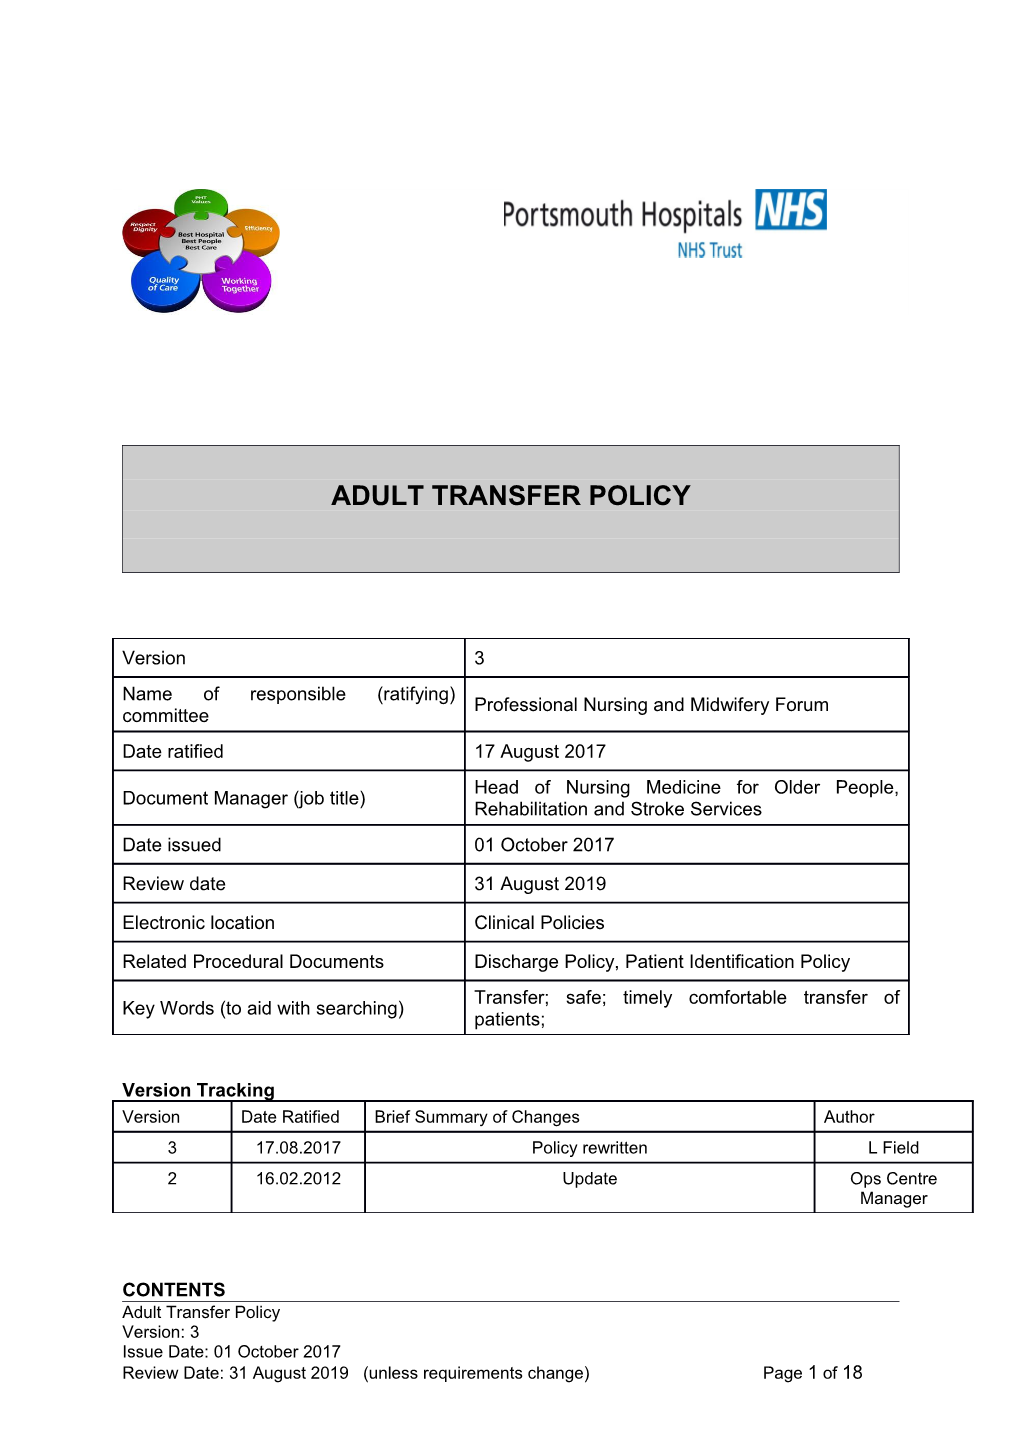 Adult Transfer Policy